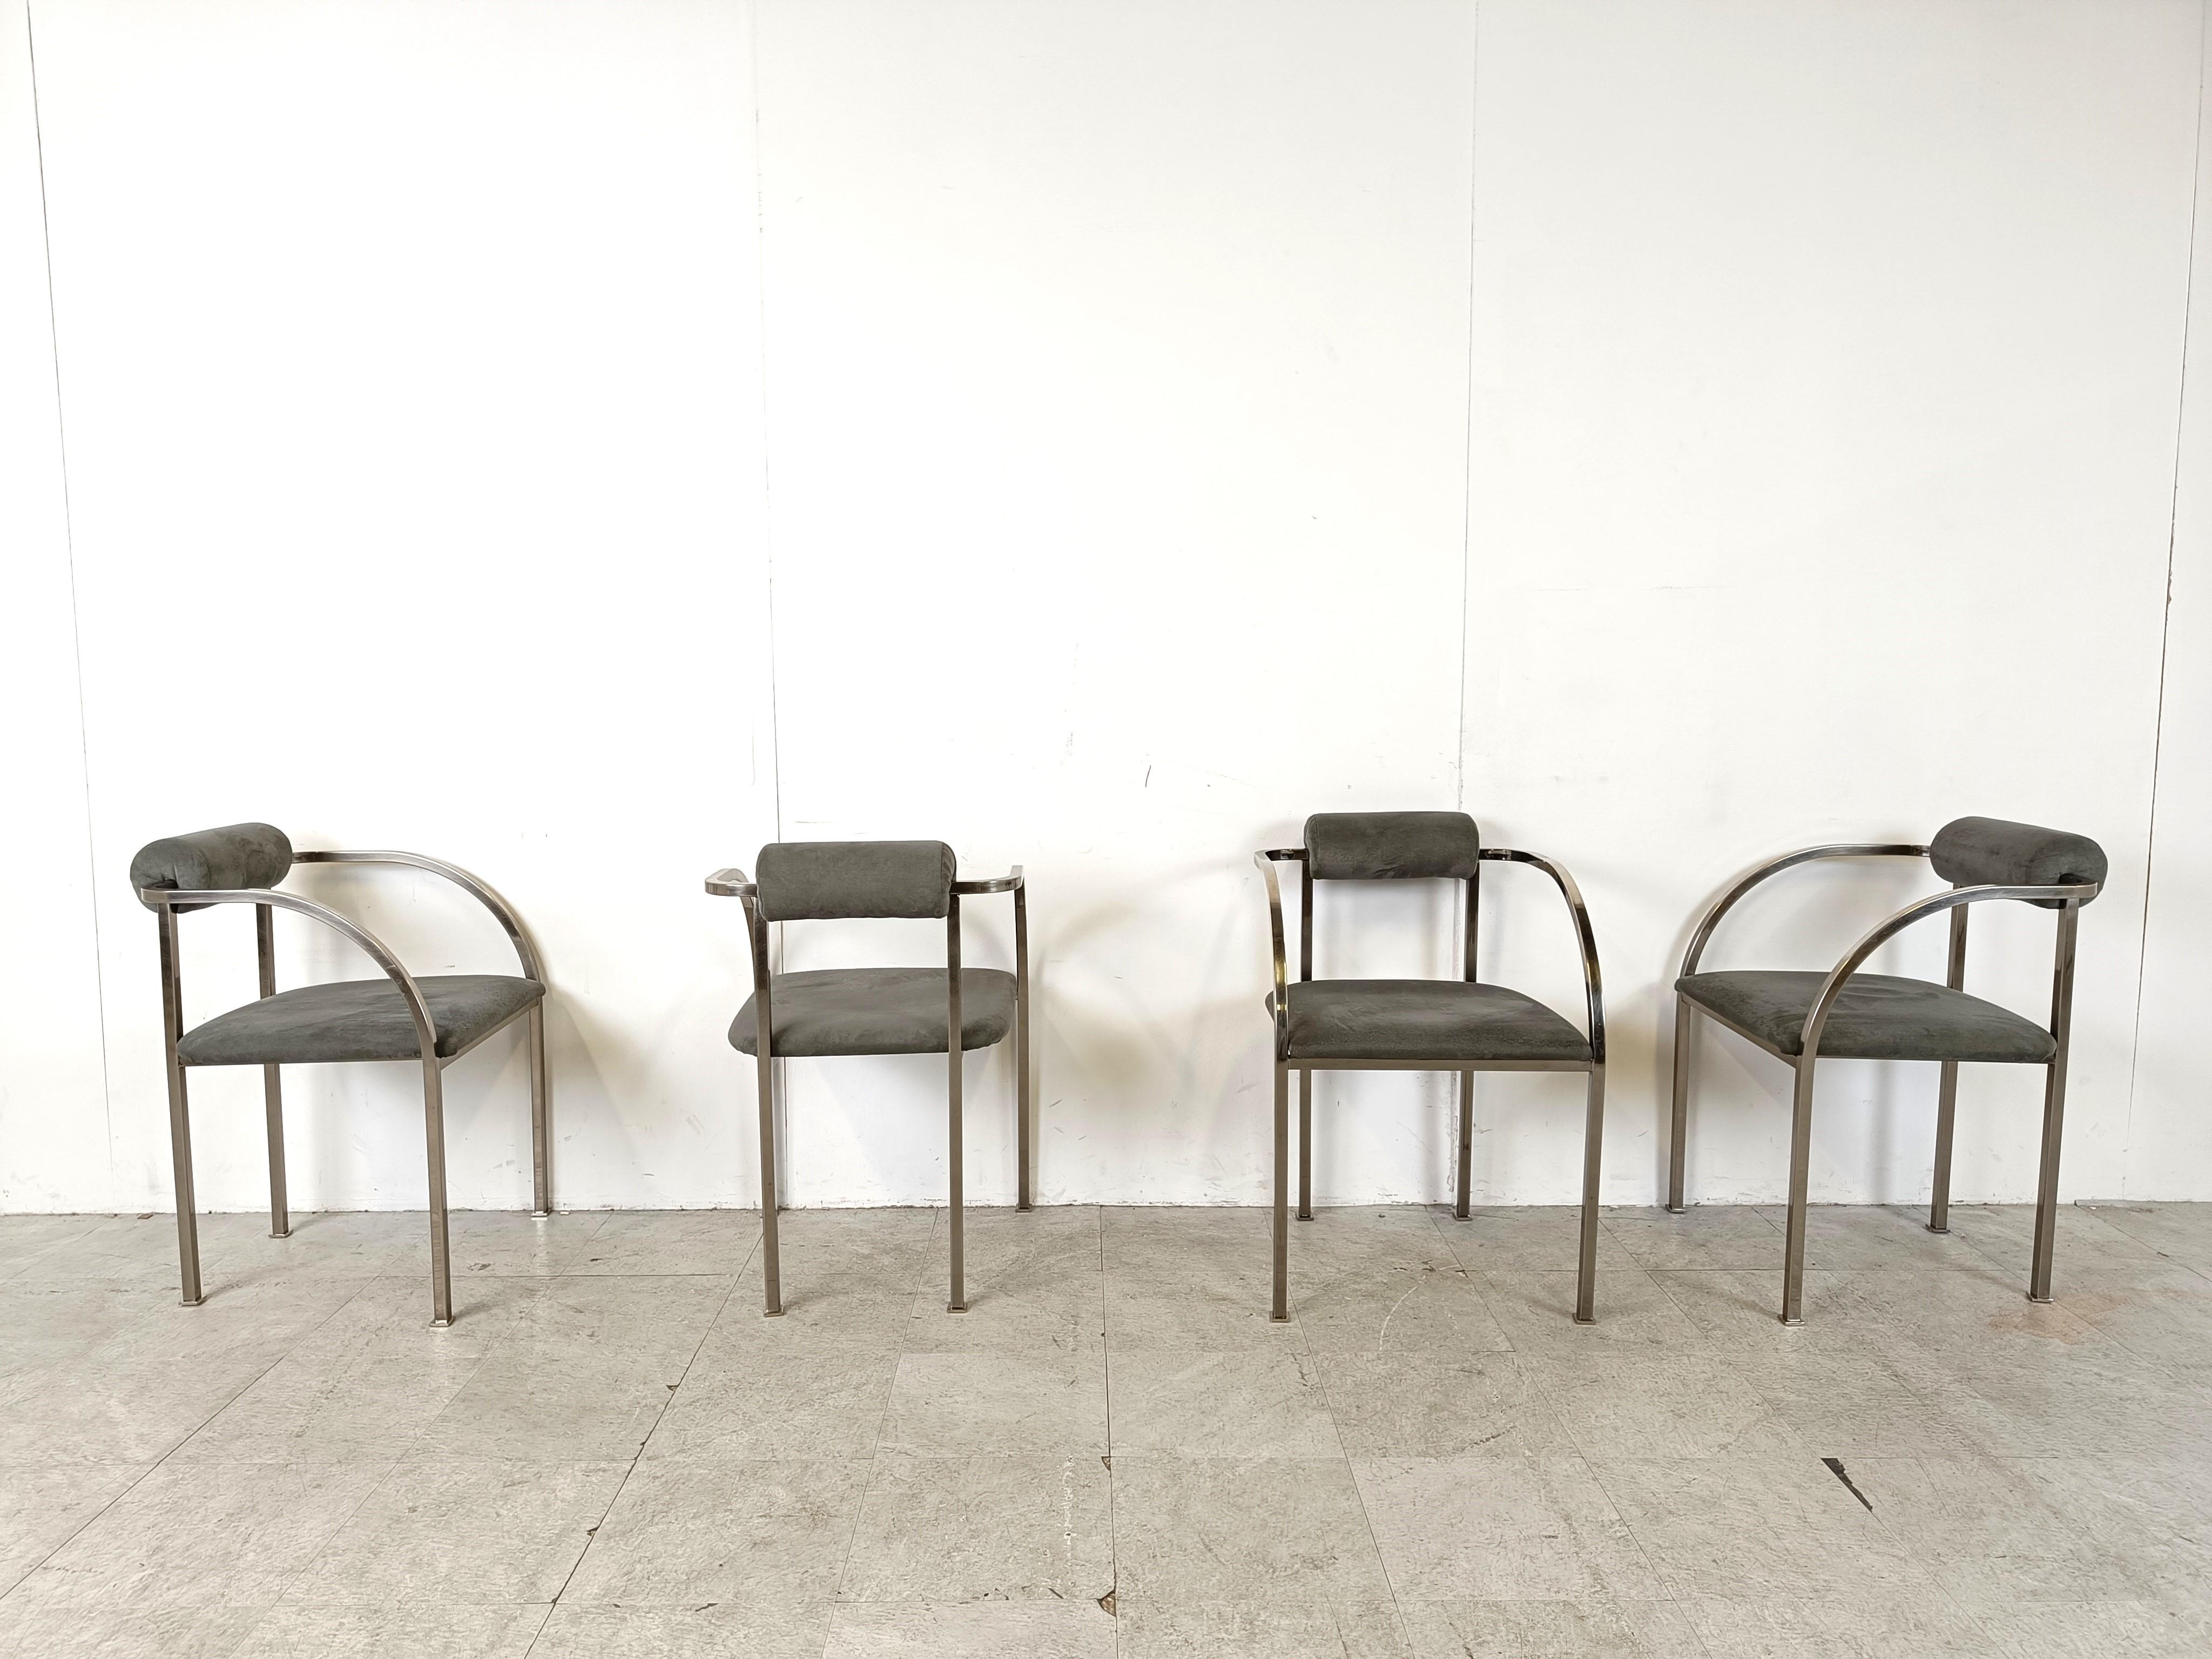 Late 20th Century Post modern dining chairs by Belgo chrom, set of 4 - 1980s For Sale